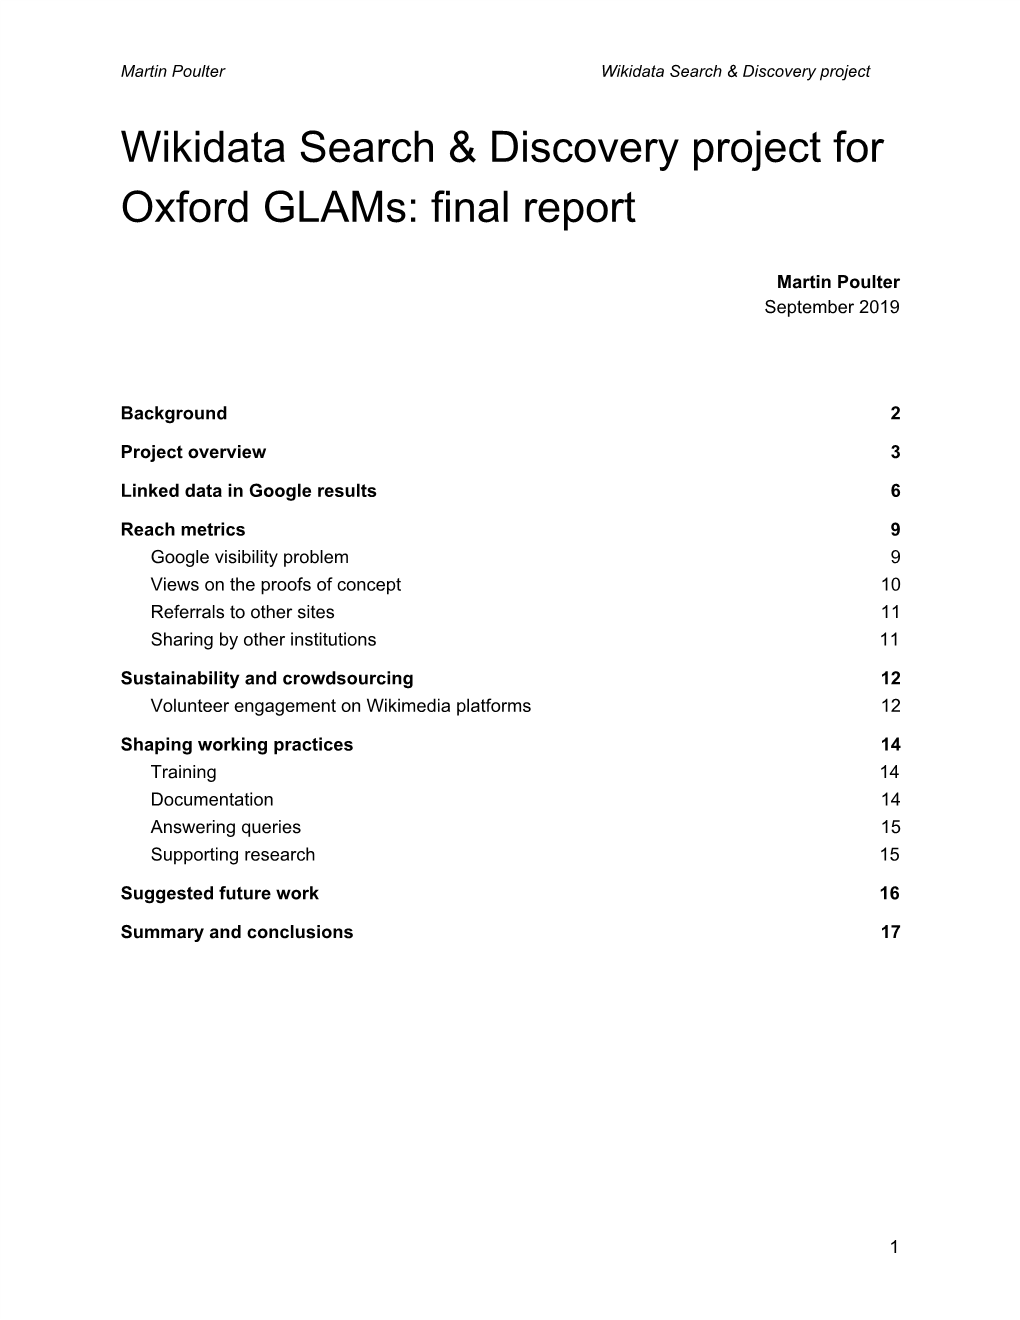 Wikidata Search & Discovery Project for Oxford Glams